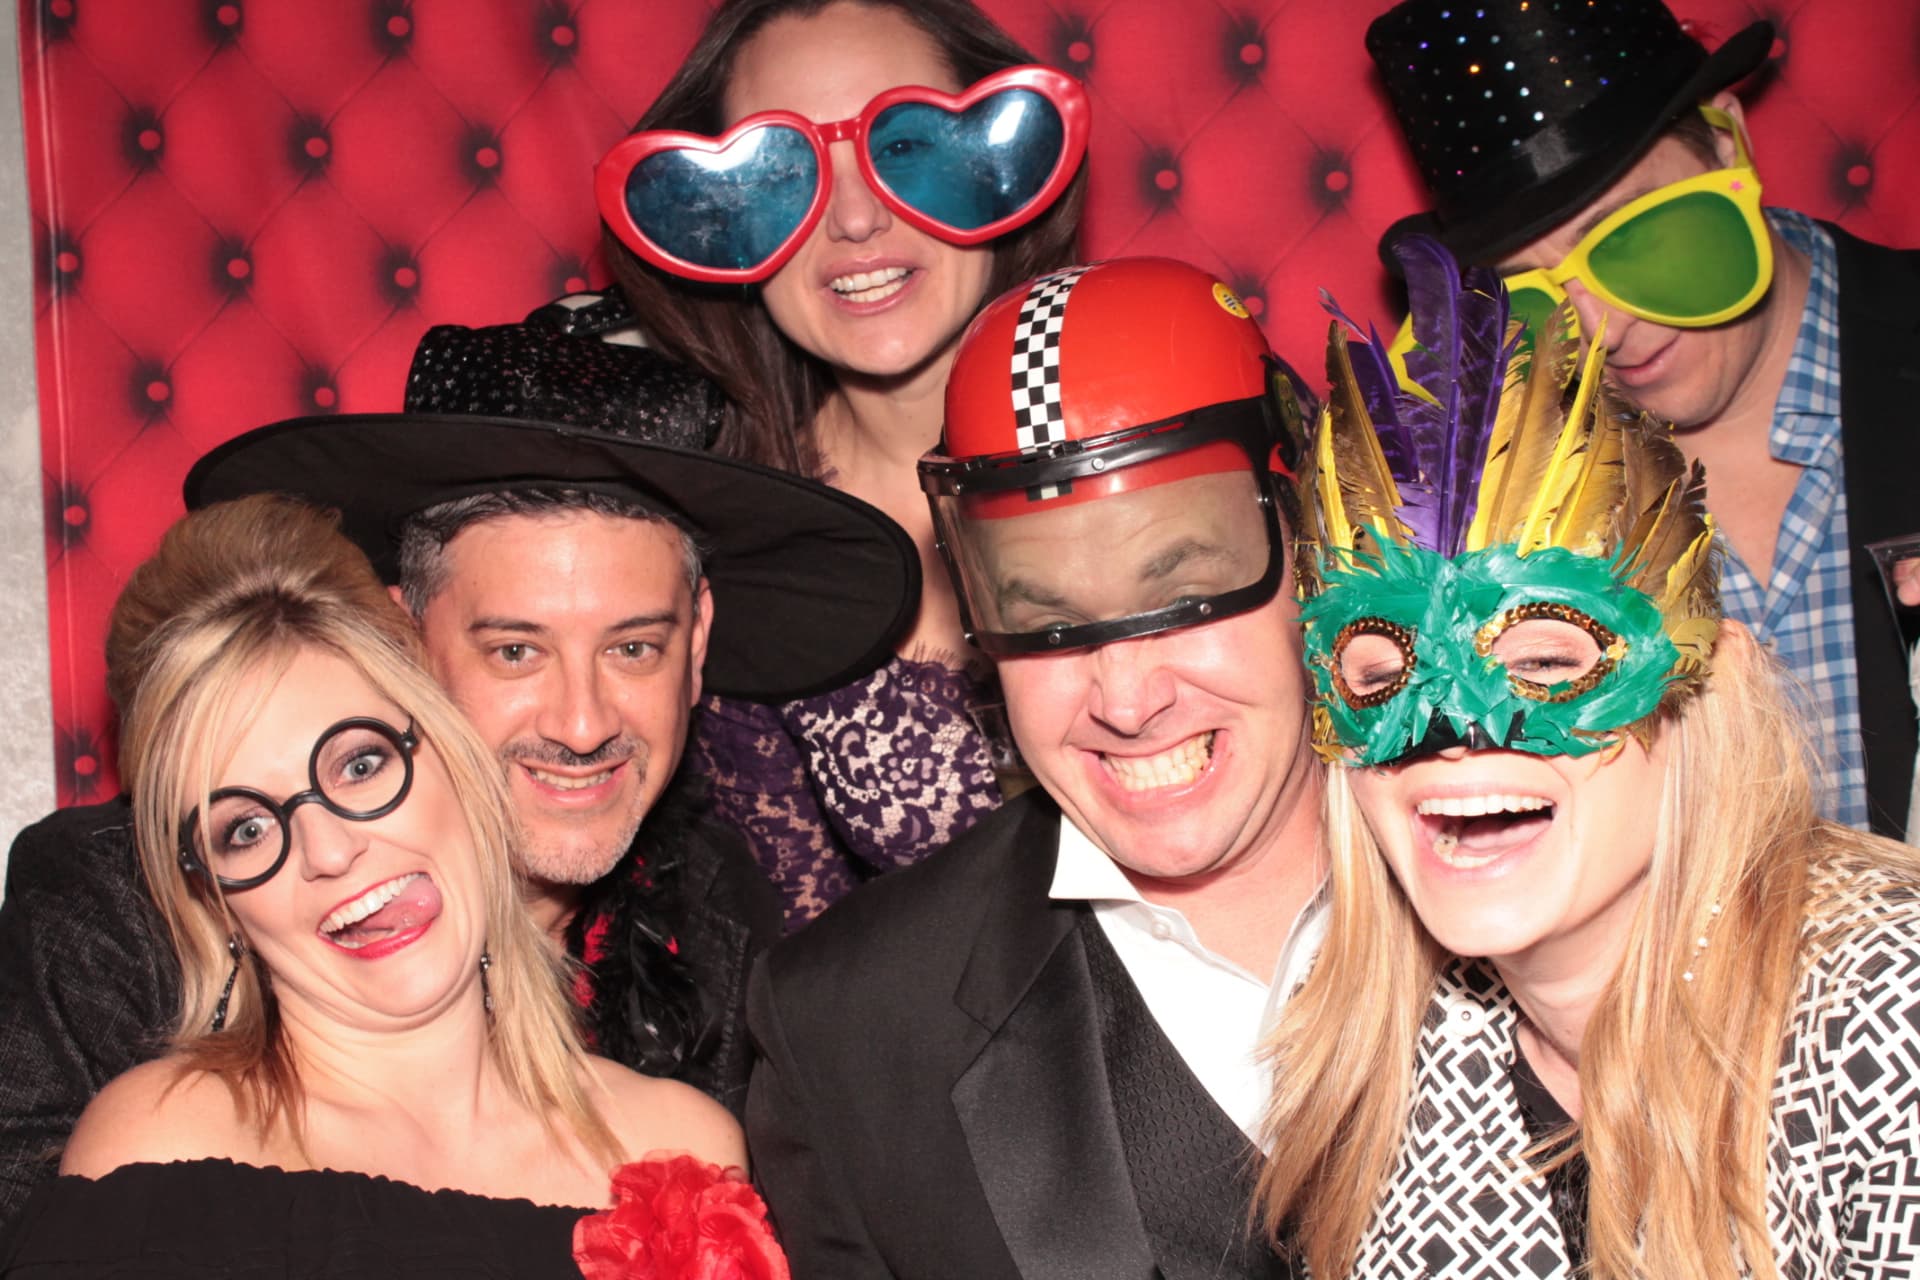 Photobooth-Rental-Austin-San Antonio-Gala-Dance-Rodeo-Palmer Events-Fundraiser-Party-No. 1-Props-Photography-LGBT-Fun-Best